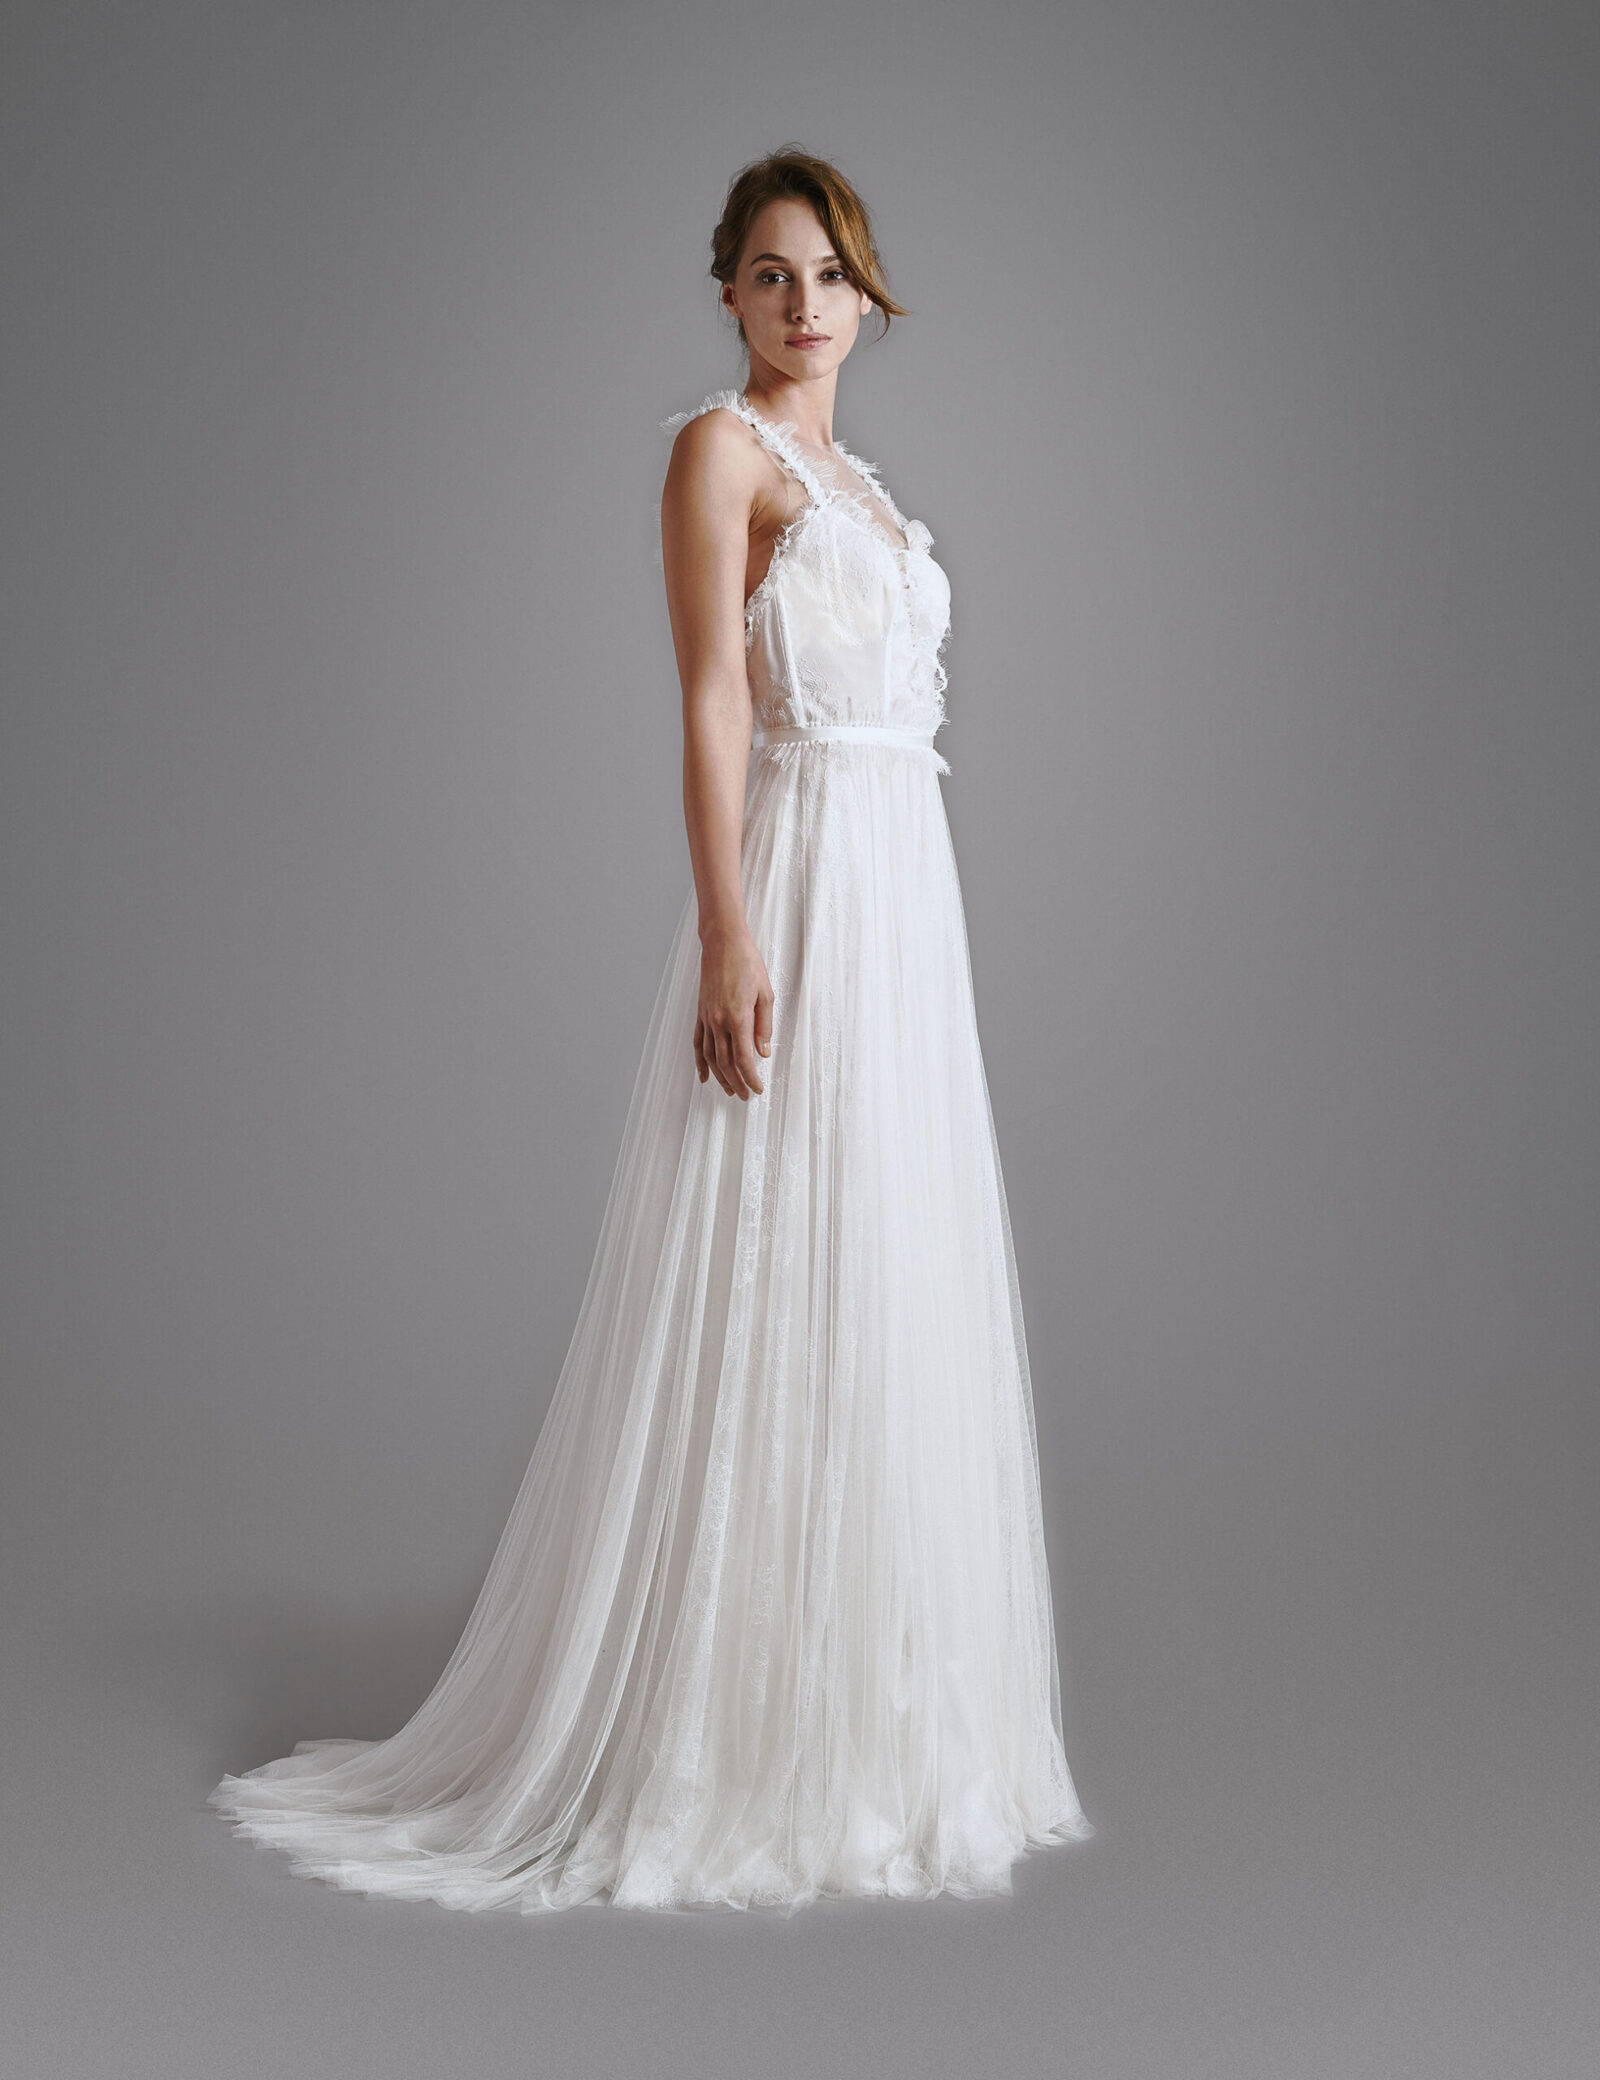 Romantic wedding dress WILLOW BUTERFLY BHARB-WILLOW-BUTTERFLY-BH2020-0005-004-tall